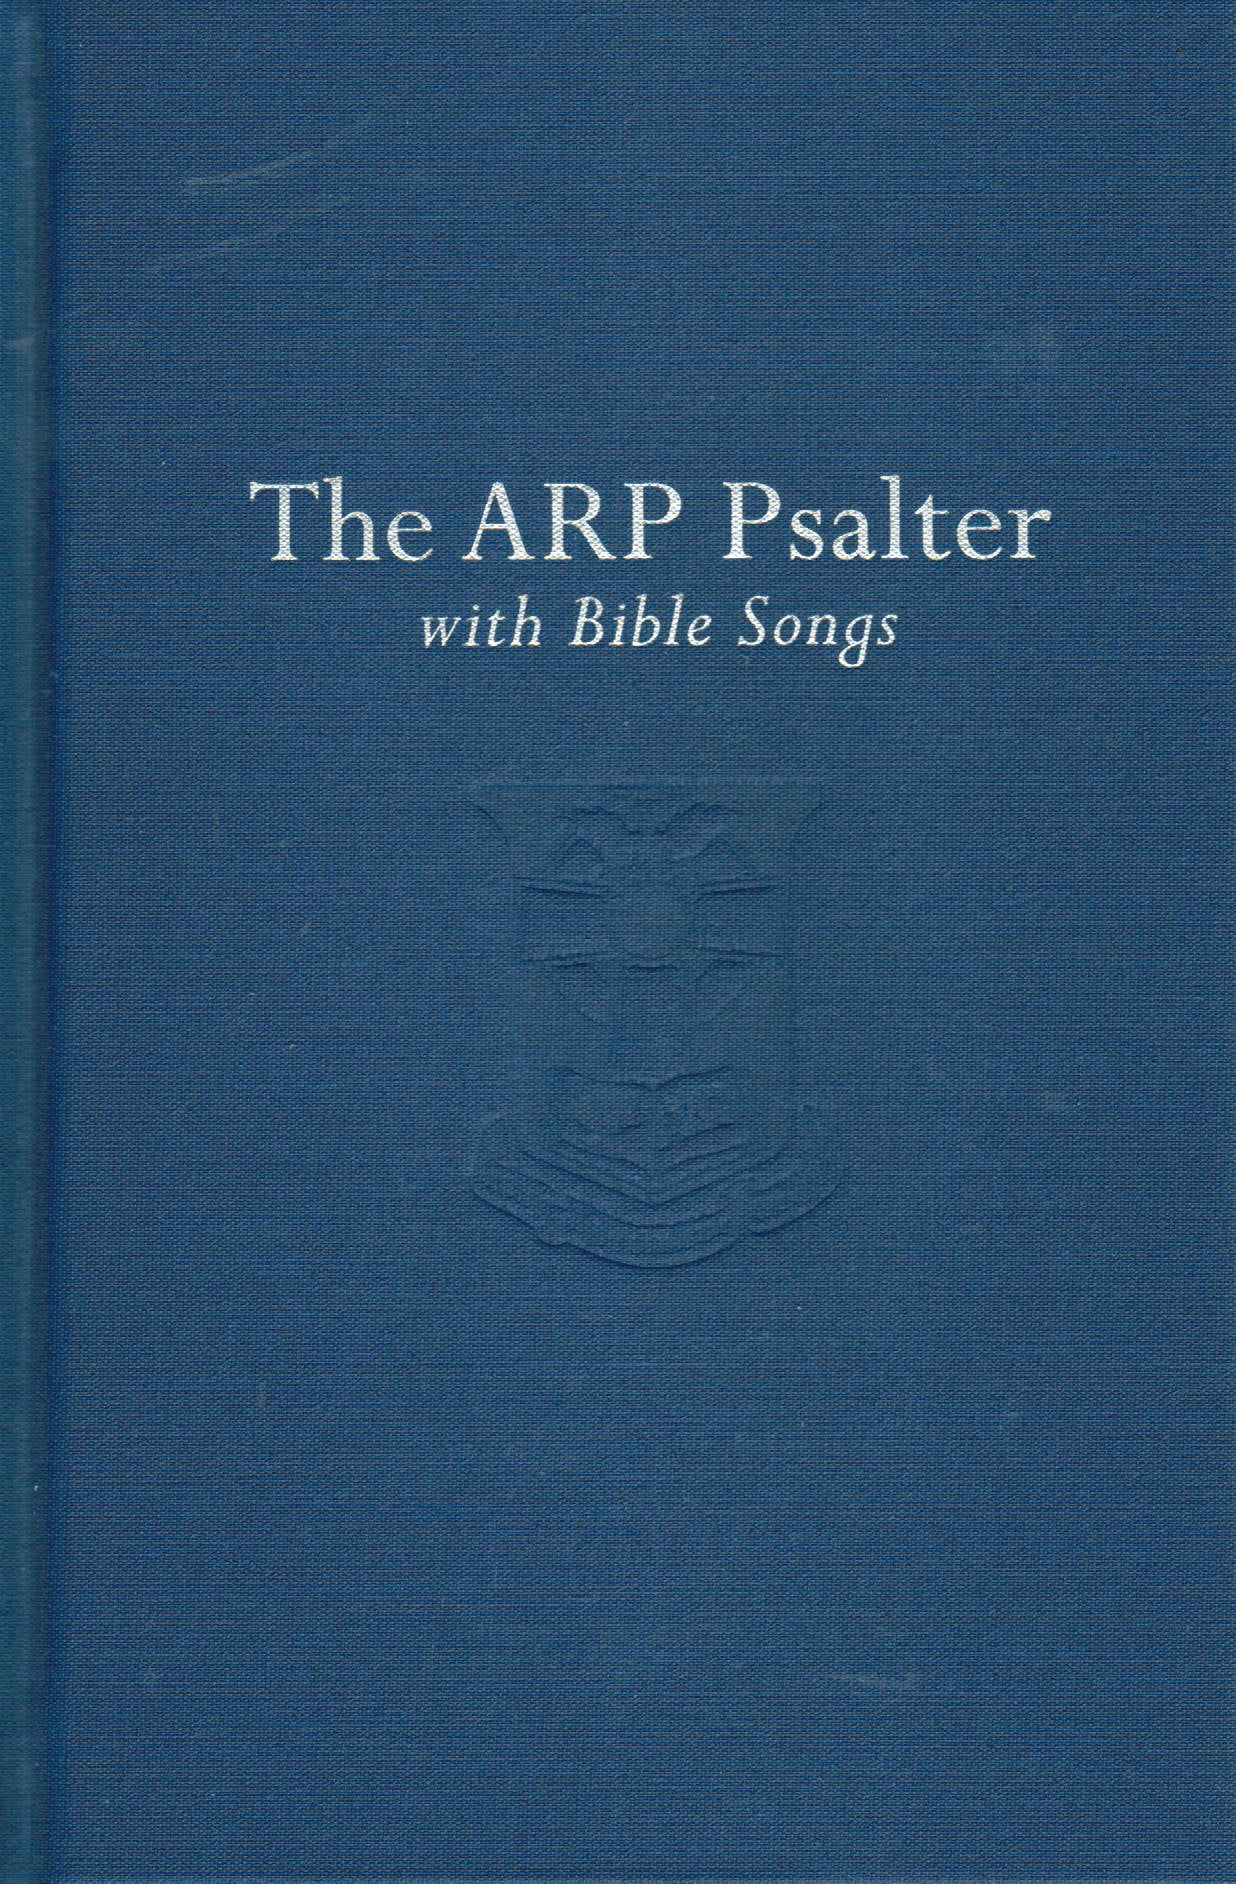 The ARP Psalter with Bible Songs - Pew Edition